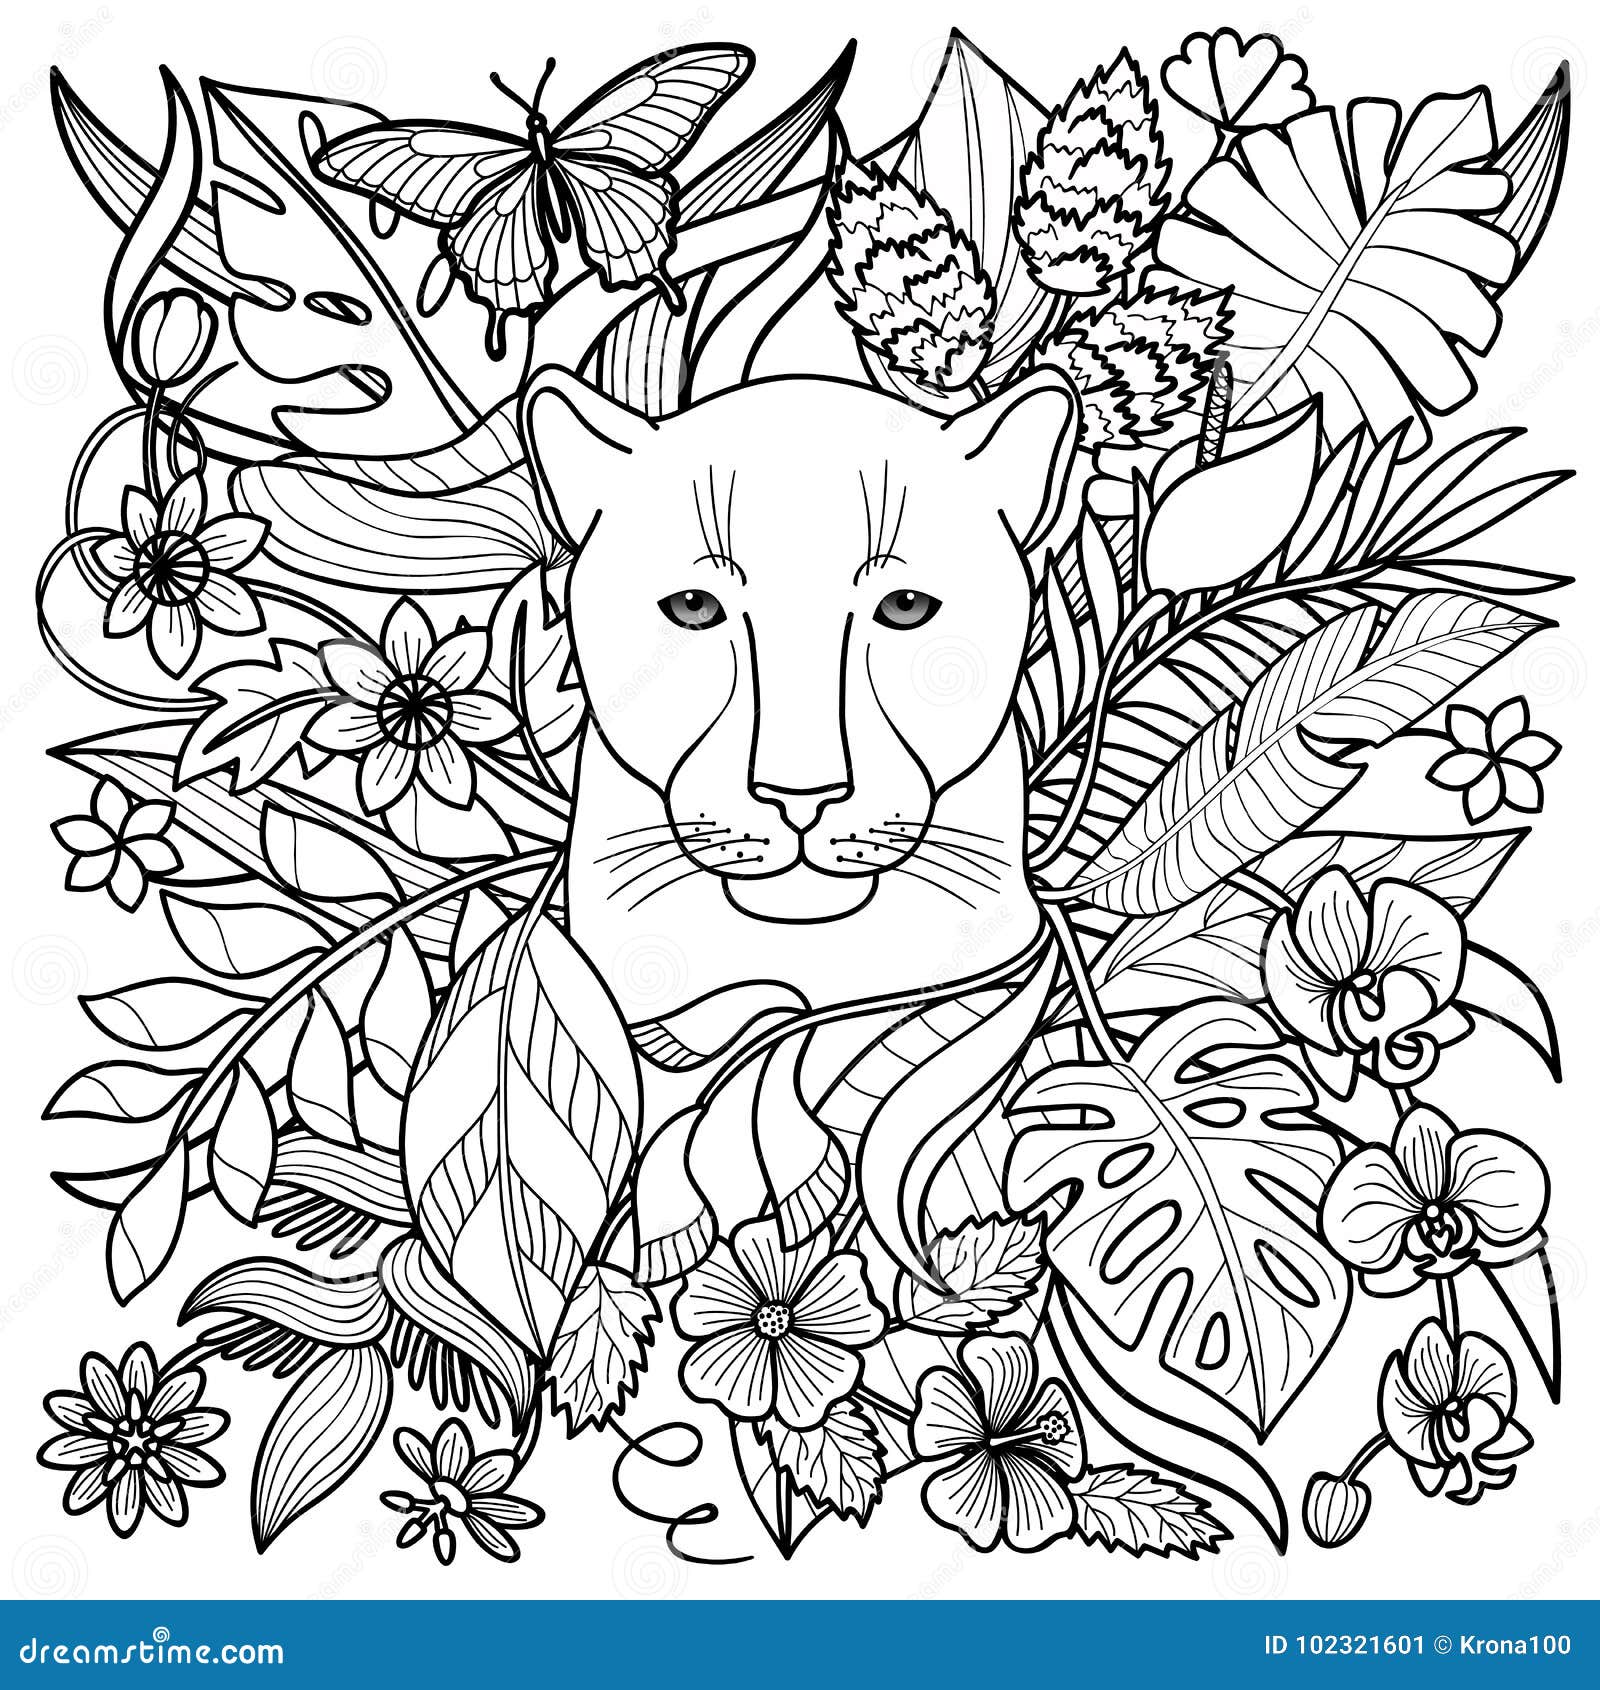 Panther Coloring Page stock vector. Illustration of black - 102321601